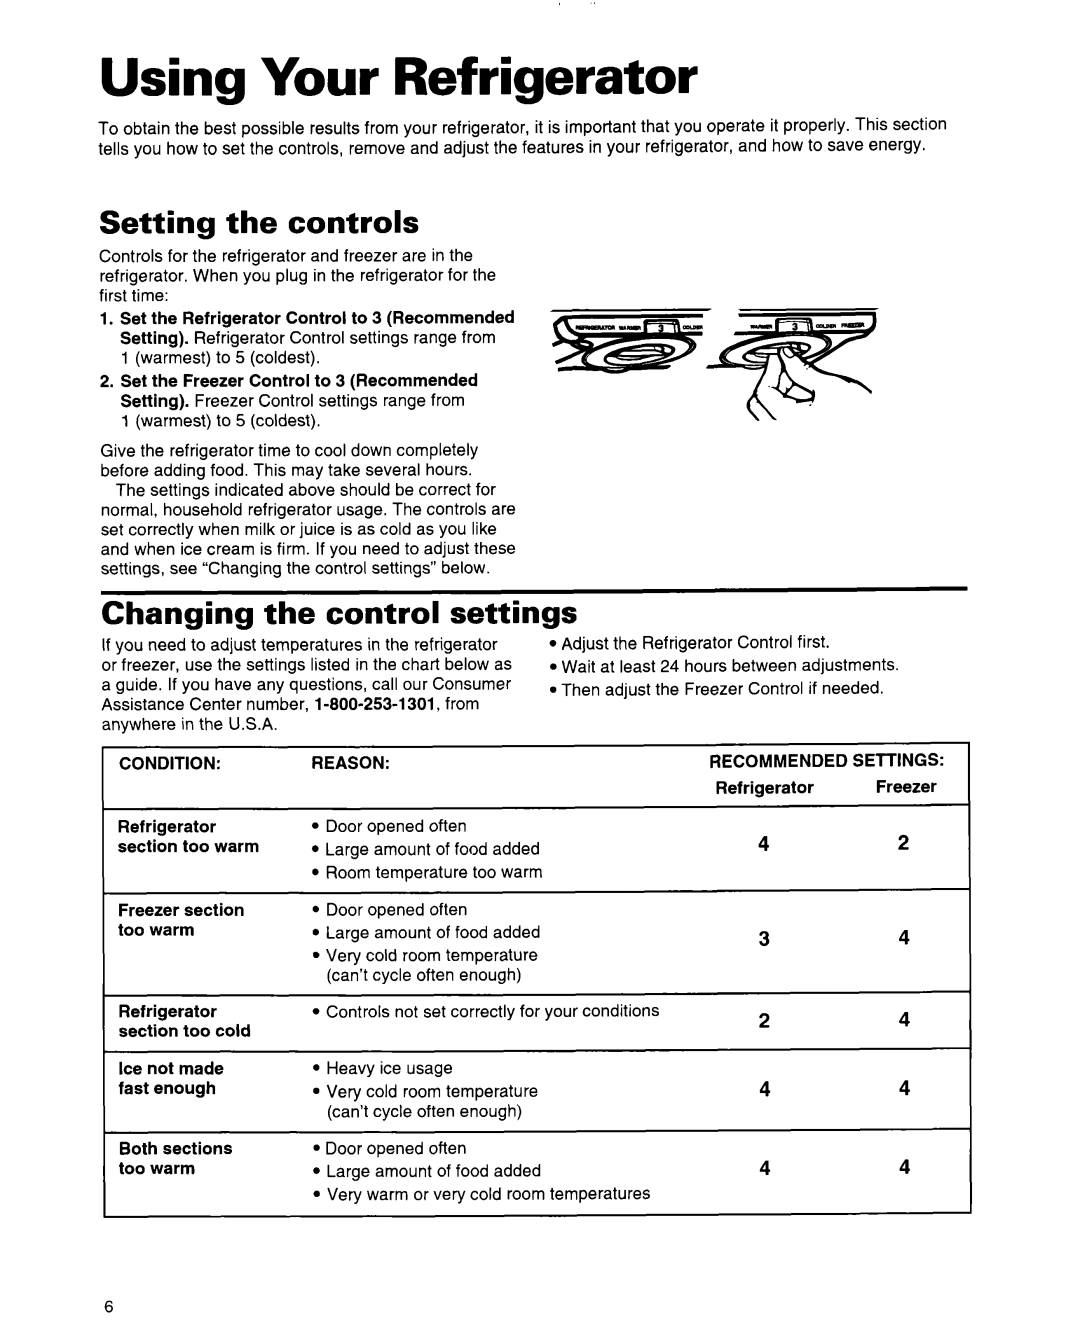 Whirlpool 2184589 warranty Using Your Refrigerator, Setting the controls, Changing the control settings 